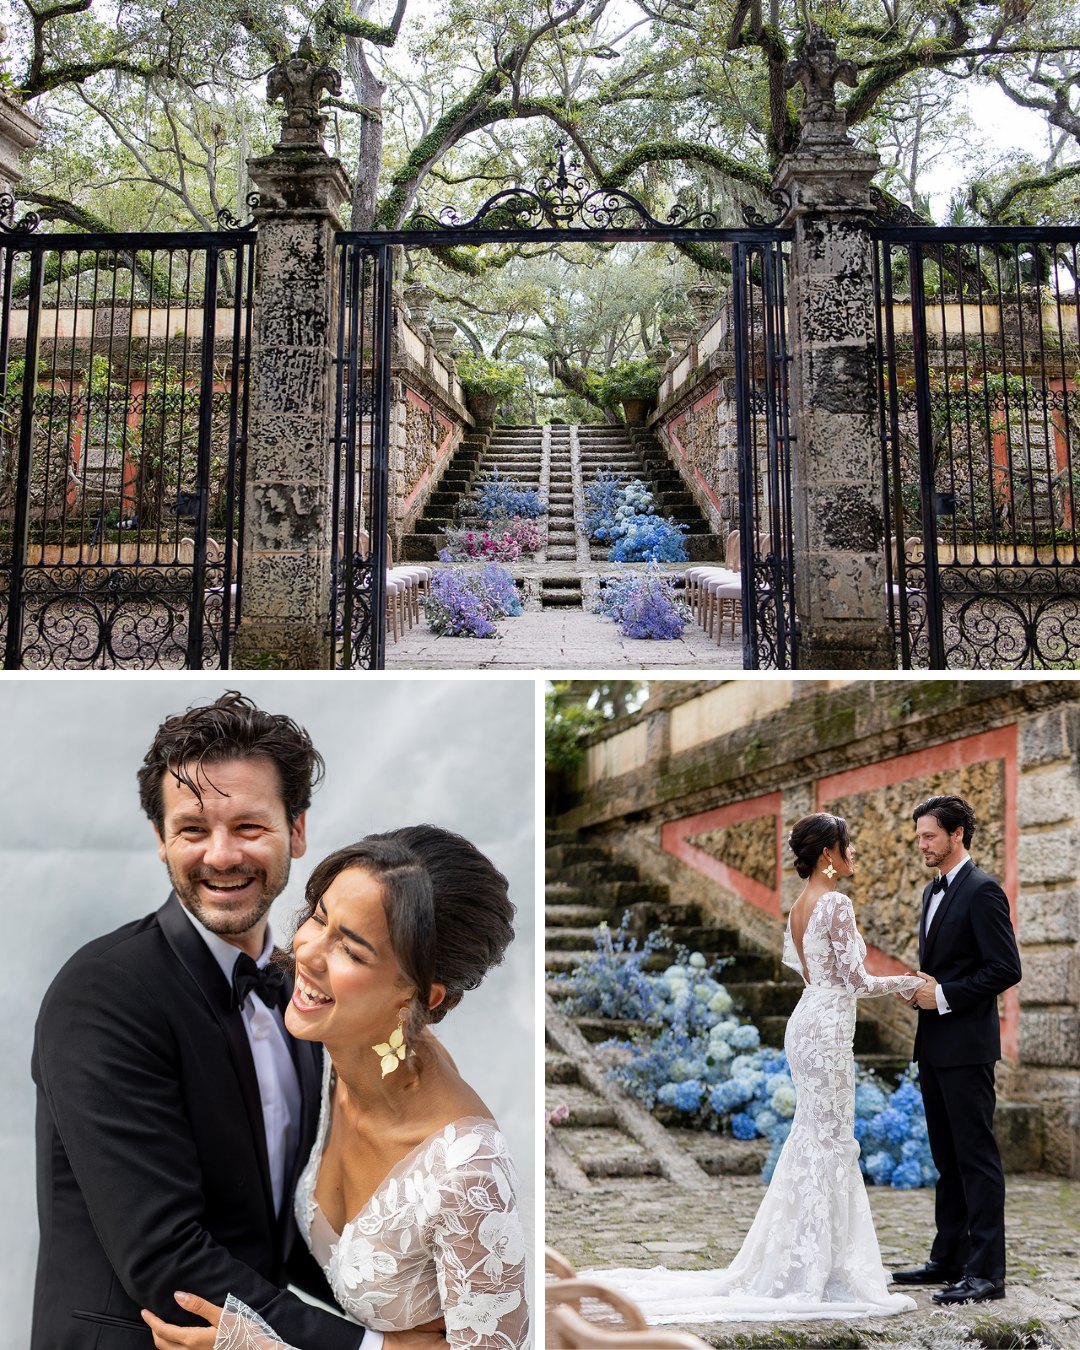 iron and stone gate frames a wedding ceremony setup with stairs leading up behind; couple laugh while hugging; couple hold hands at altar with blue ground floral arrangements behind